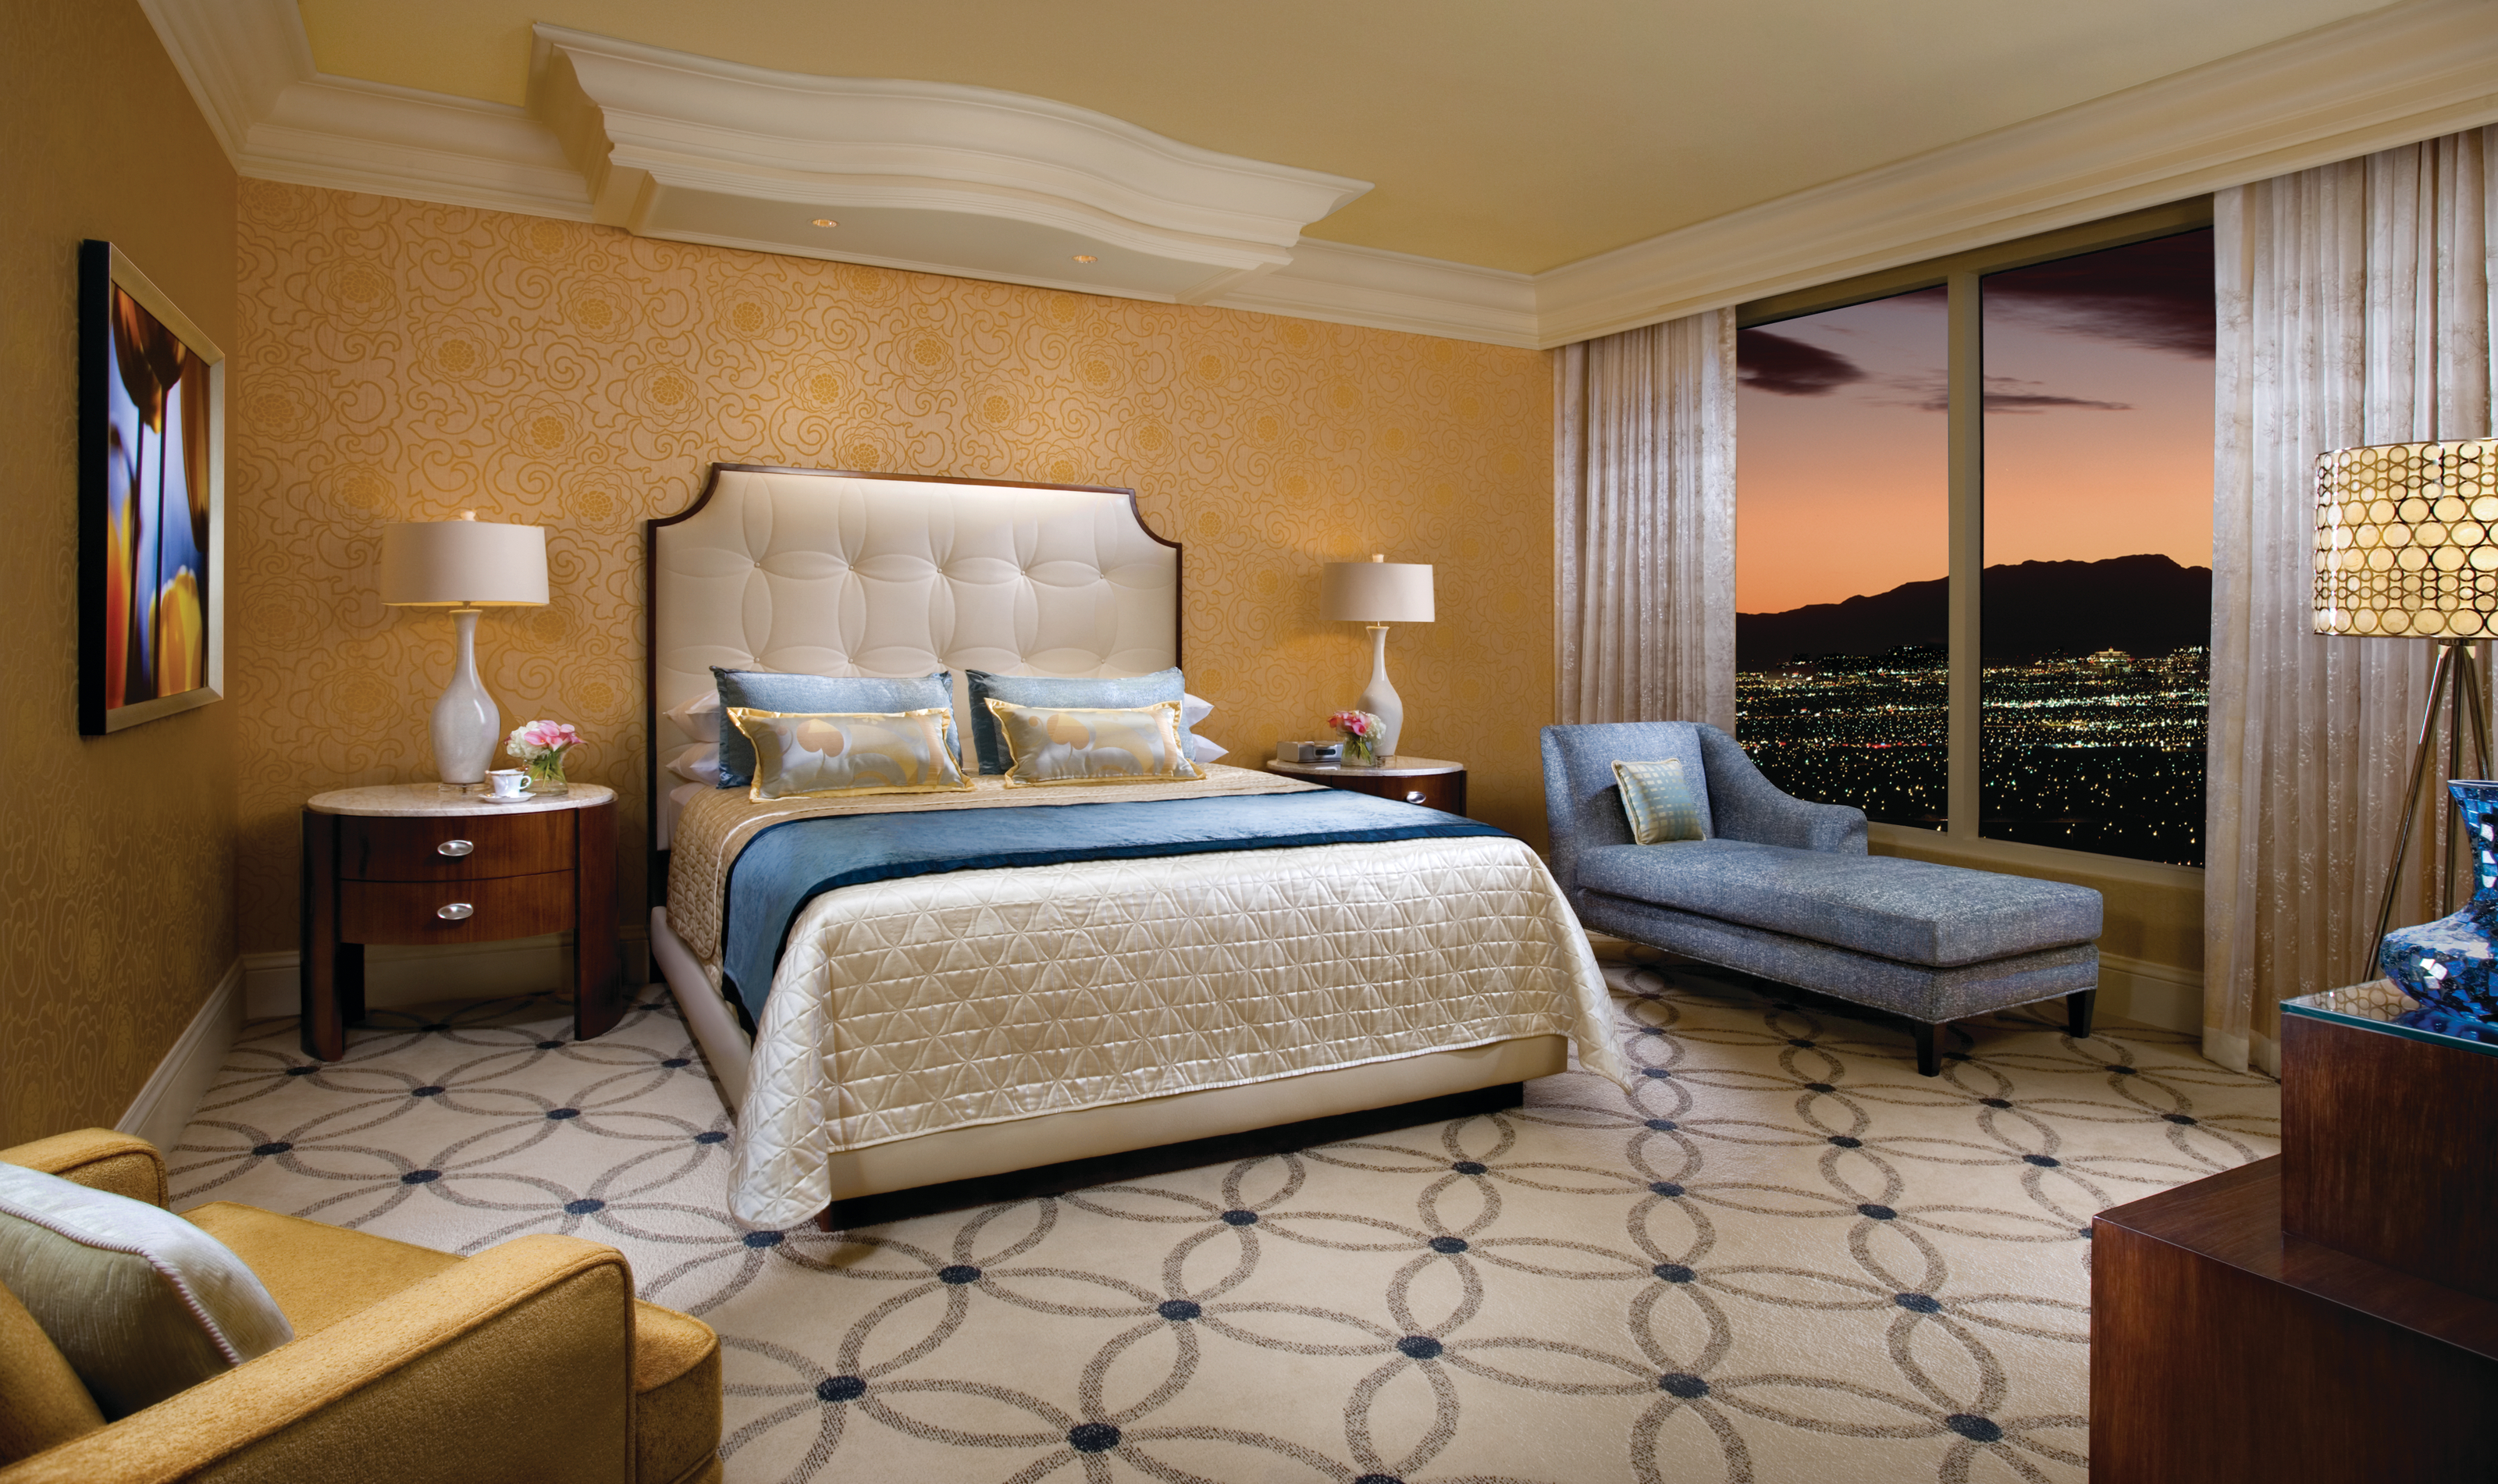 Bellagio Premier King Room Review - Take a Look Inside!